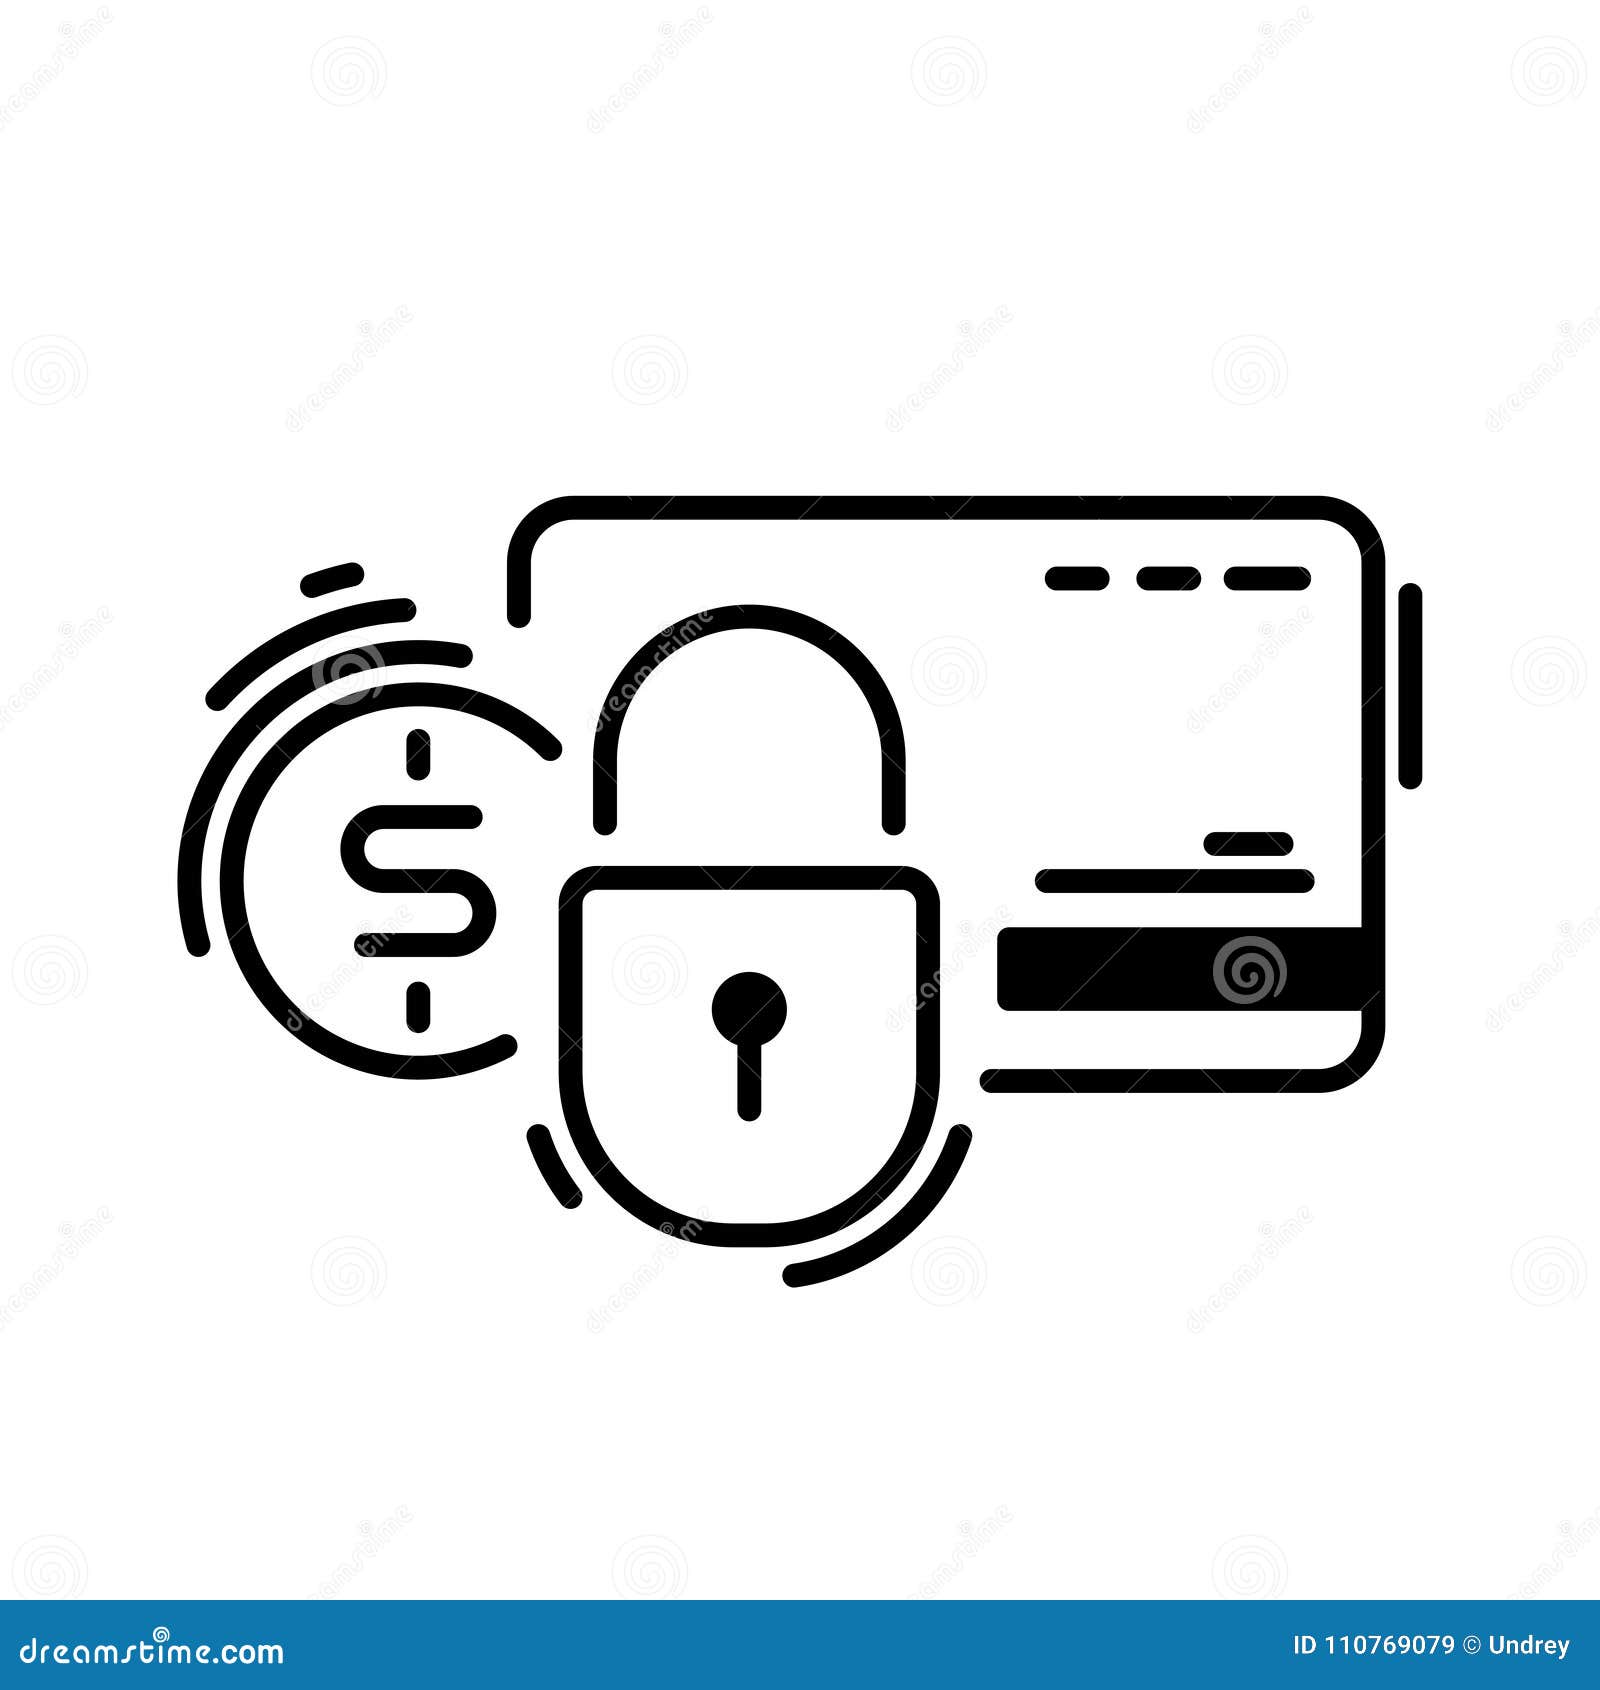 pay, credit card, protection, secure. payment methods thin line icon